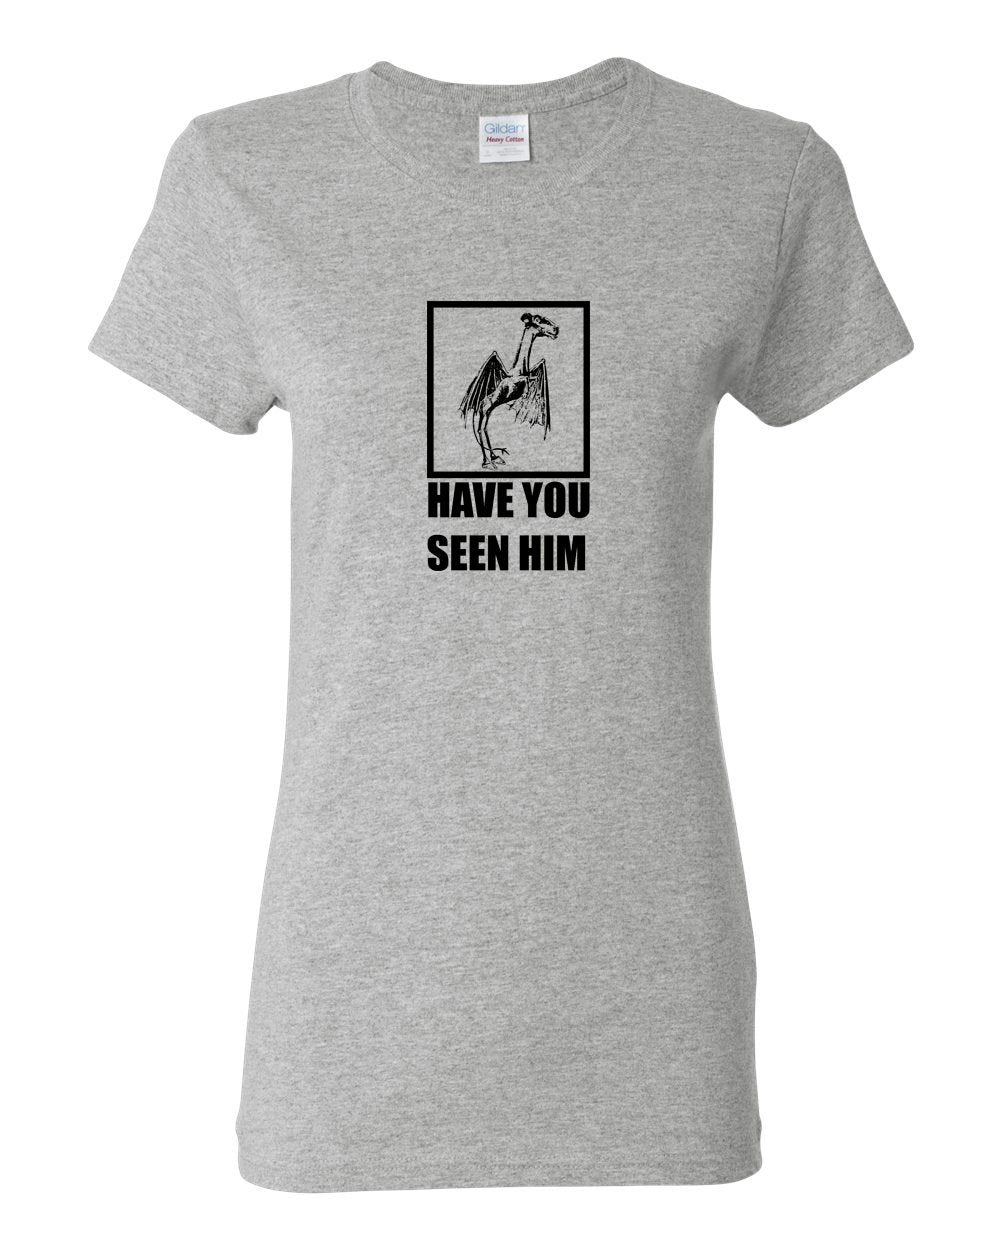 Have You Seen Him? LADIES Missy-Fit T-Shirt